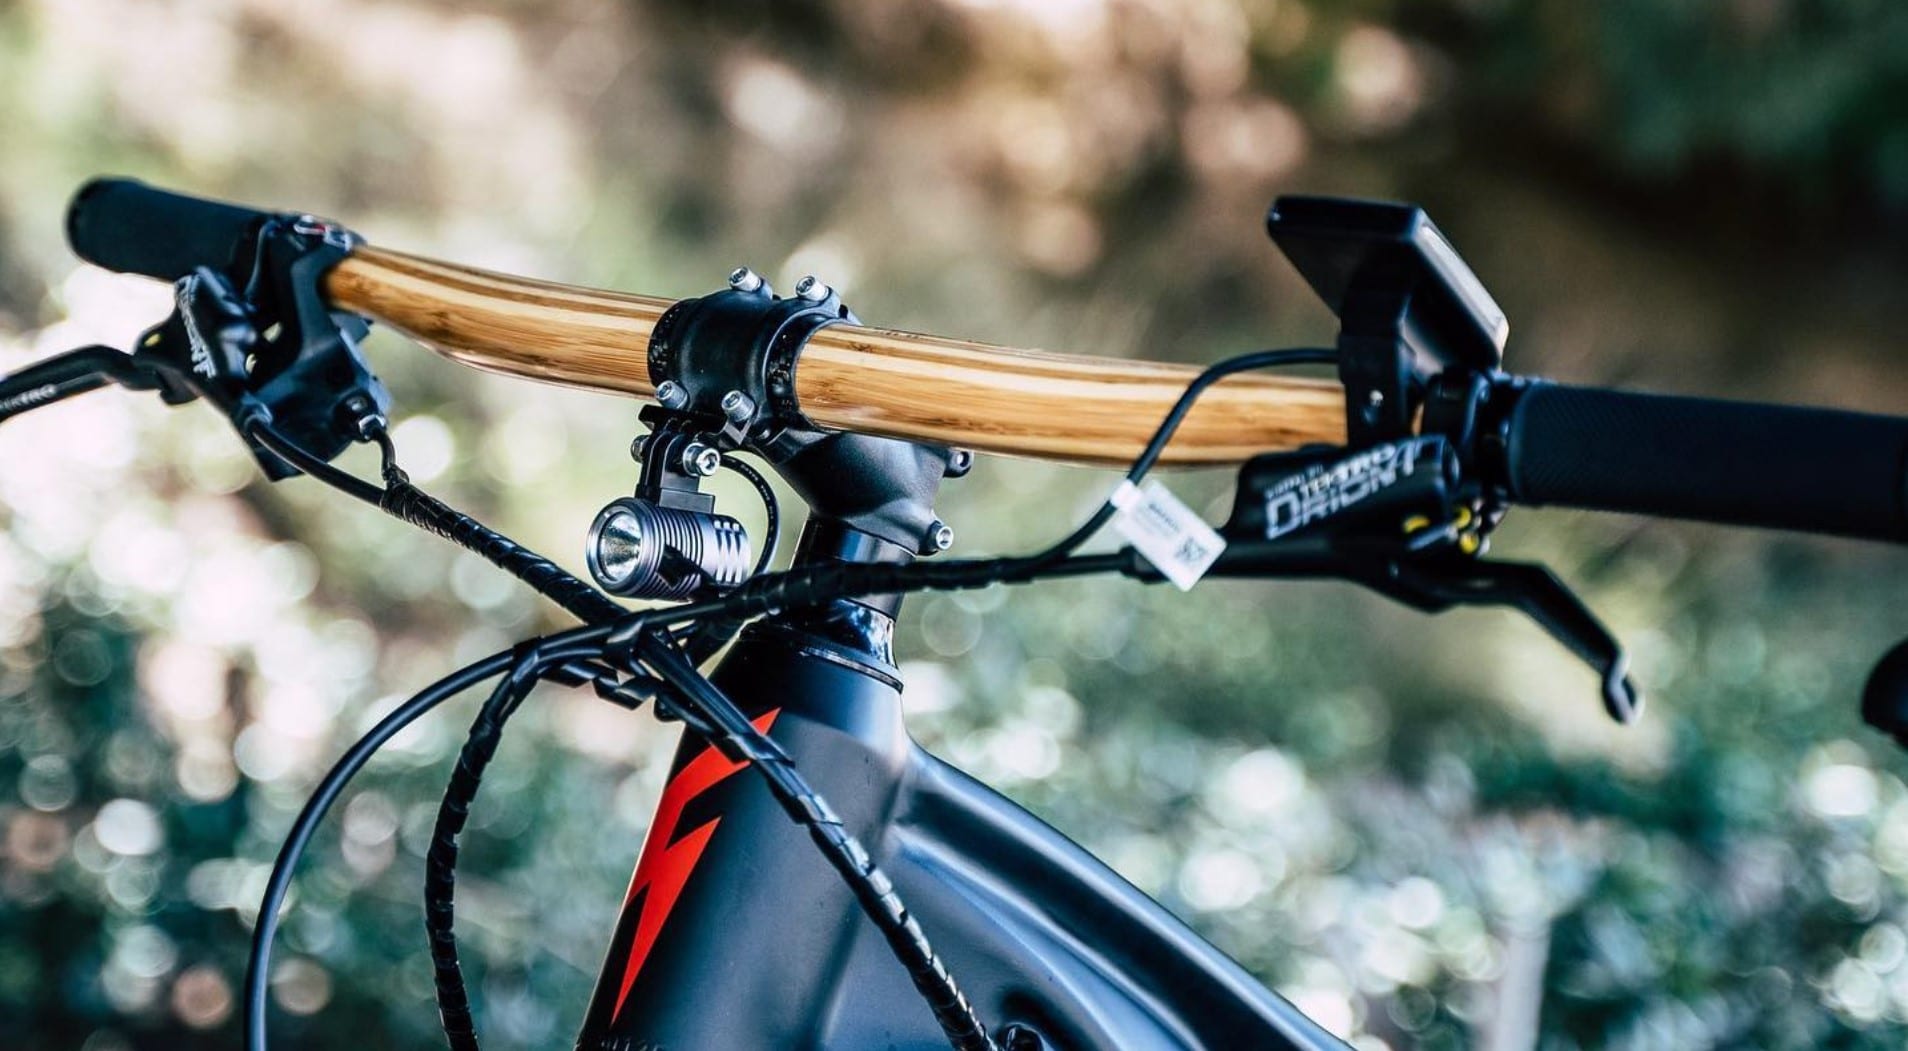 The Gump bamboo bicycle handlebar will give your hands a break